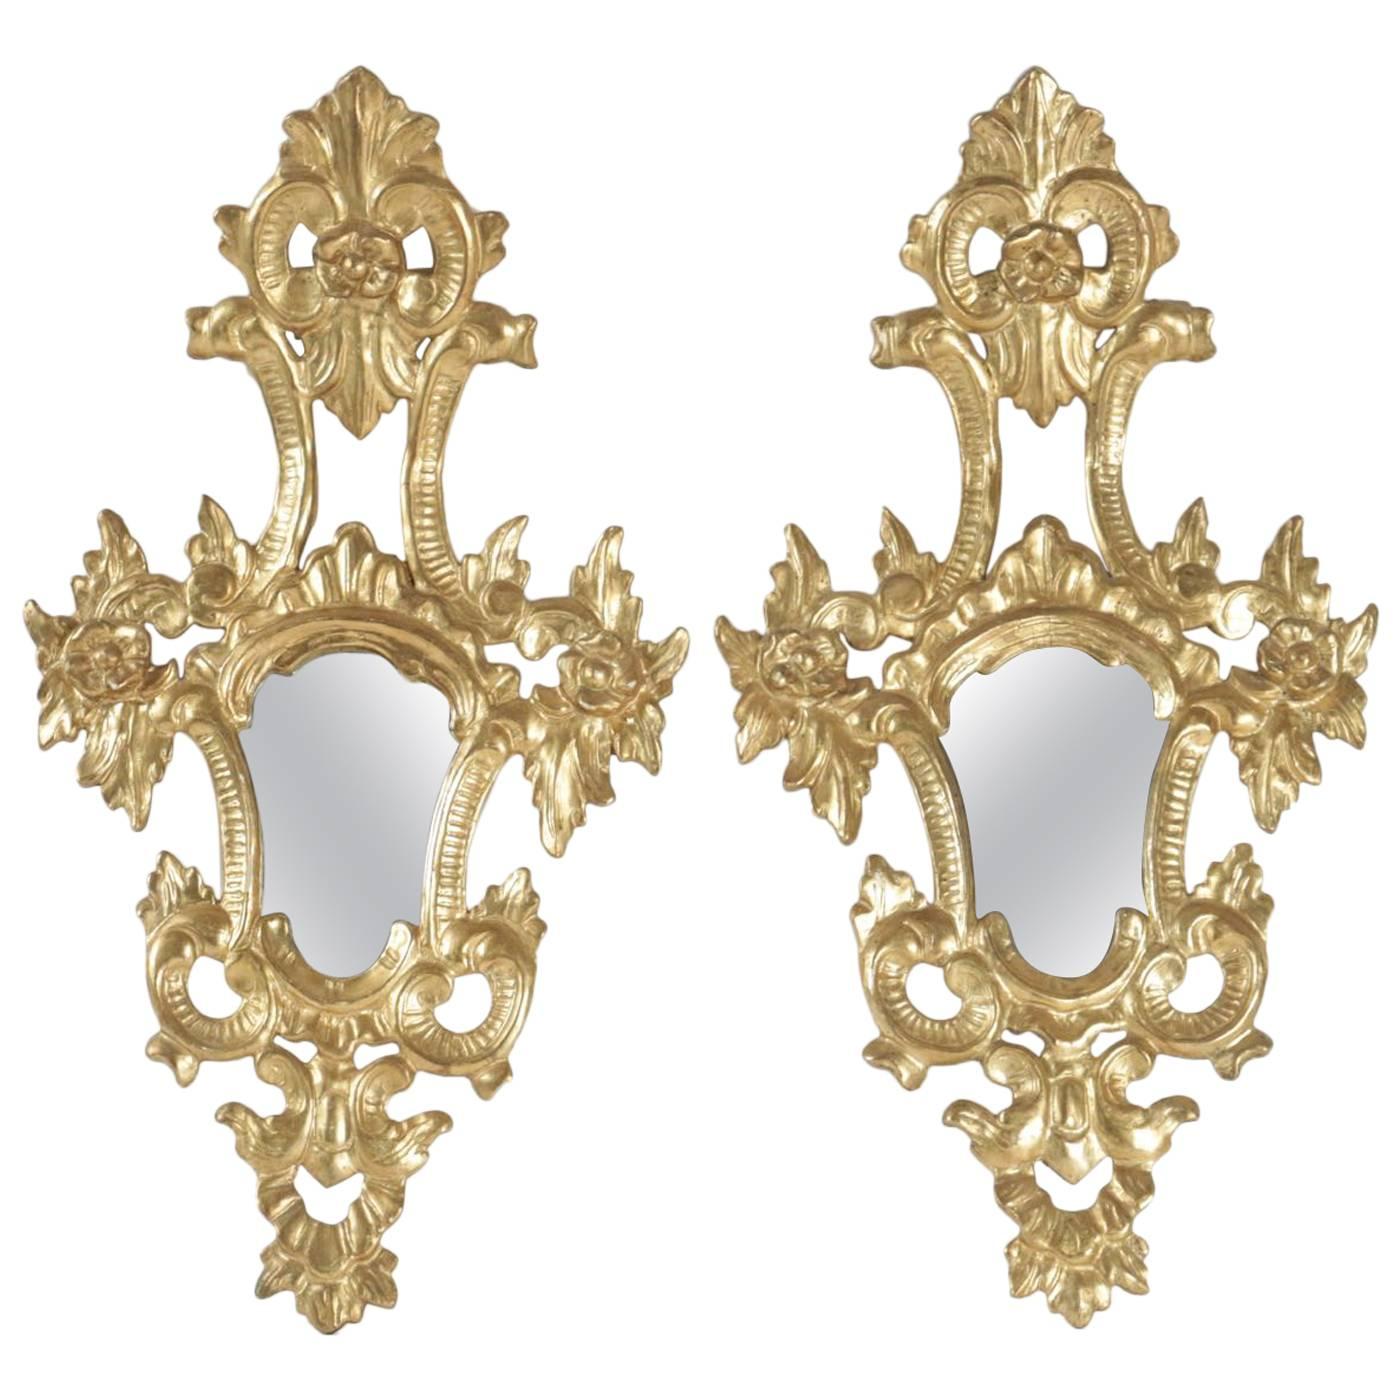 Pair of Superior Quality Gold Gilt Wooden Hand Carved Mirrors Napoleon III